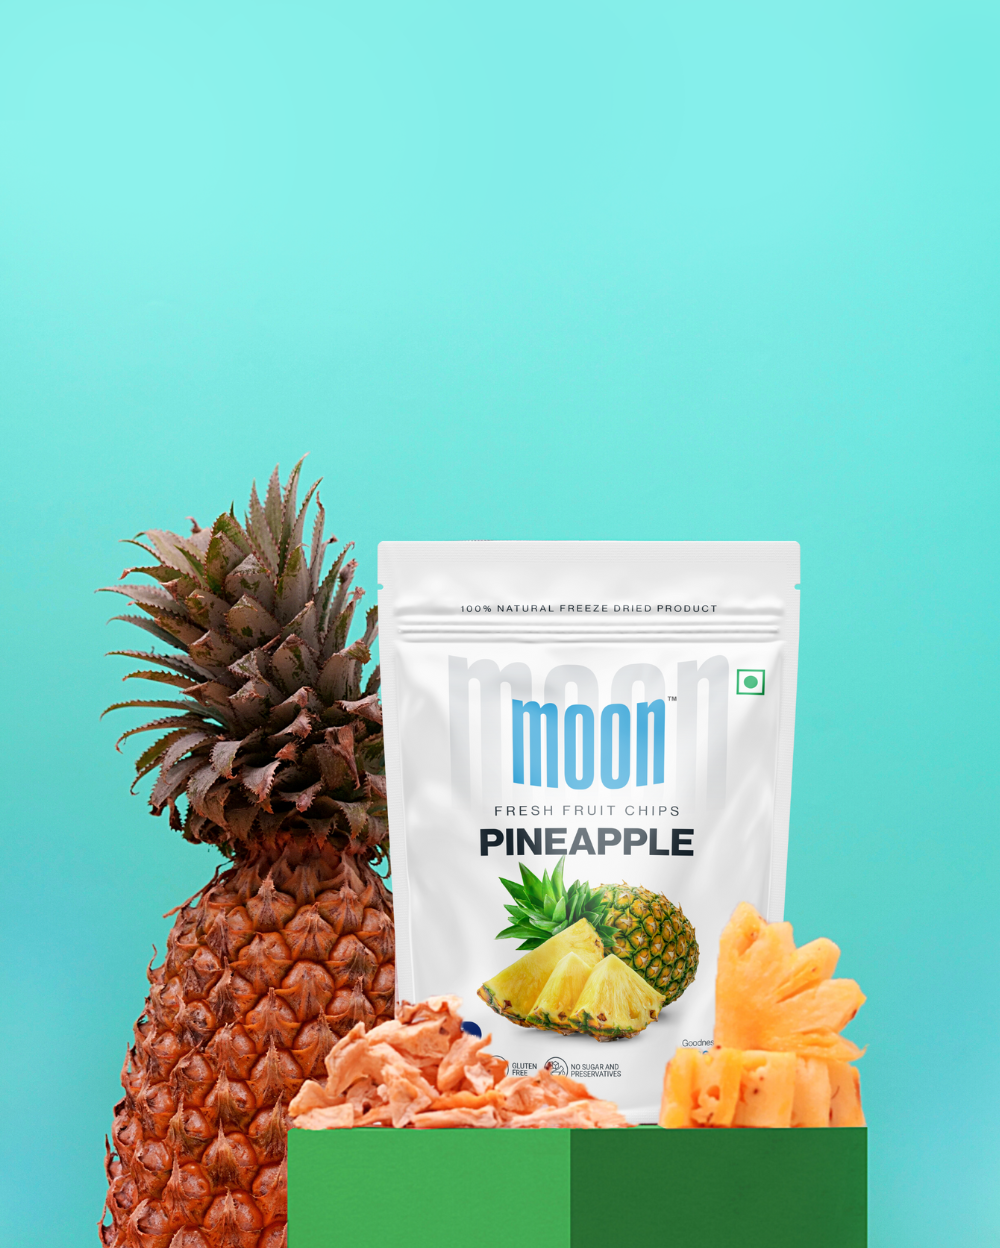 A portable box with Moon Freeze Dried Pineapple, bananas, and a bag of chips packed with vitamins and minerals by Themoonstoreindia.